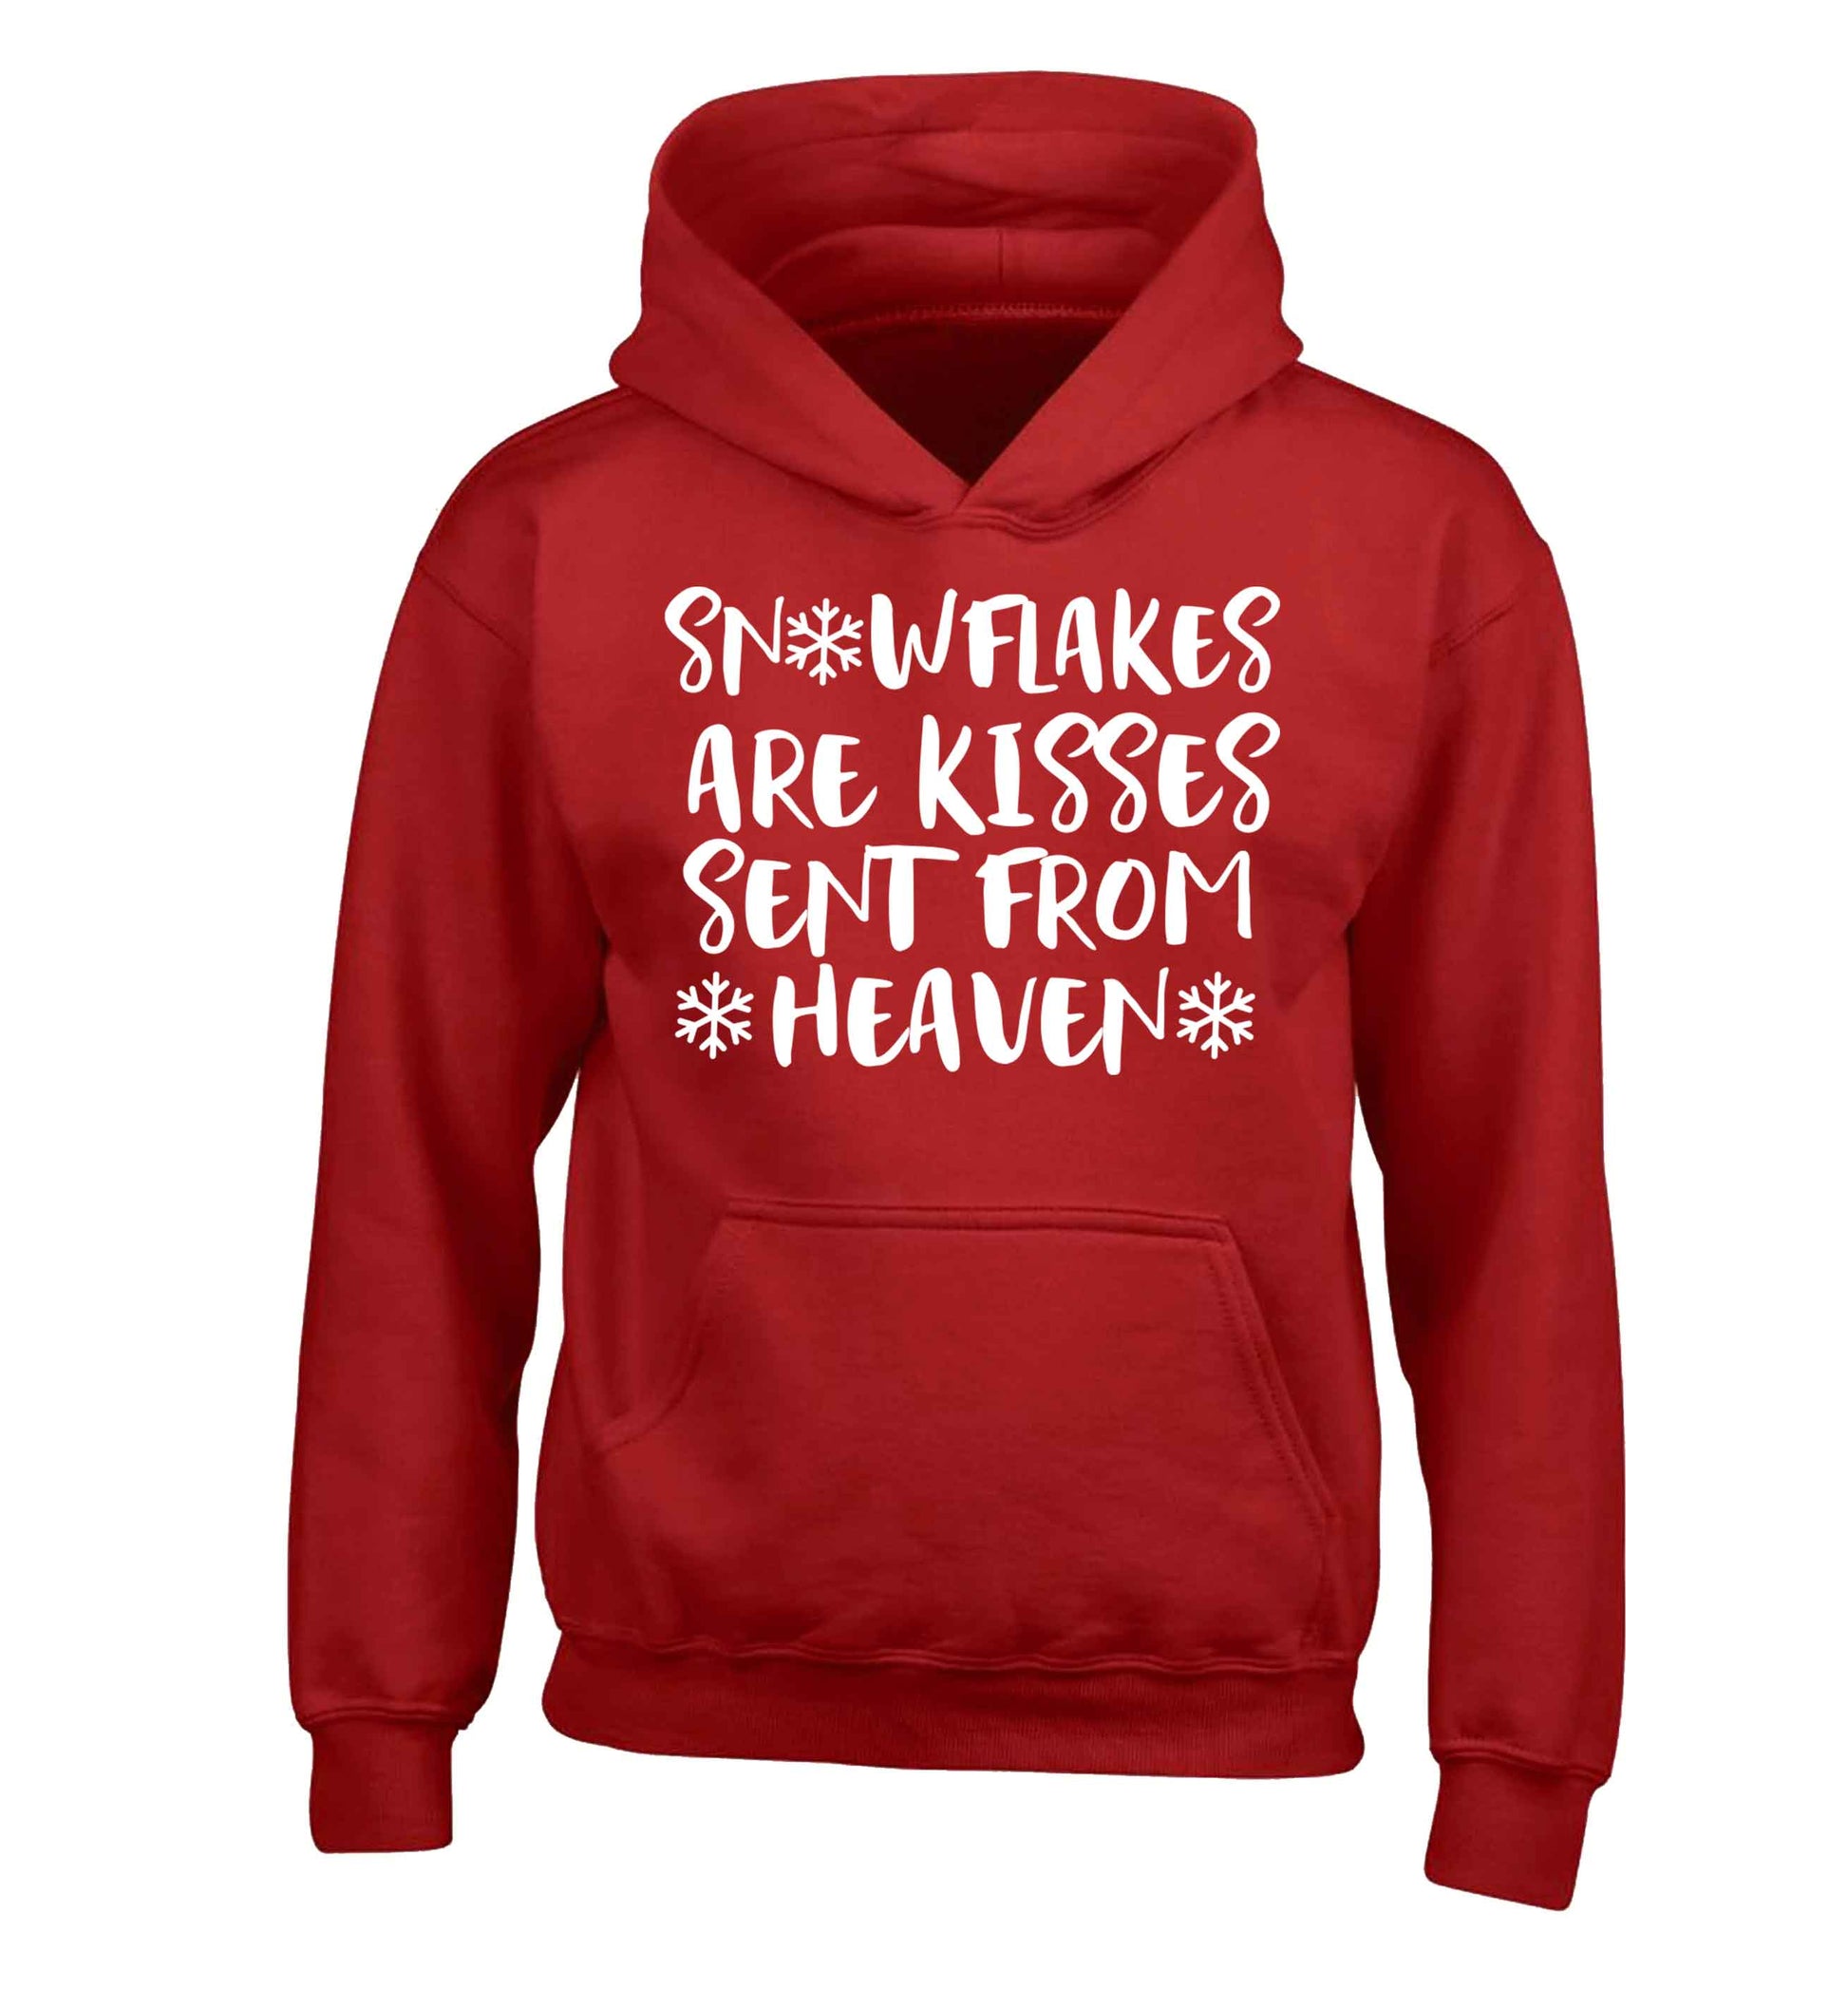 Snowflakes are kisses sent from heaven children's red hoodie 12-13 Years